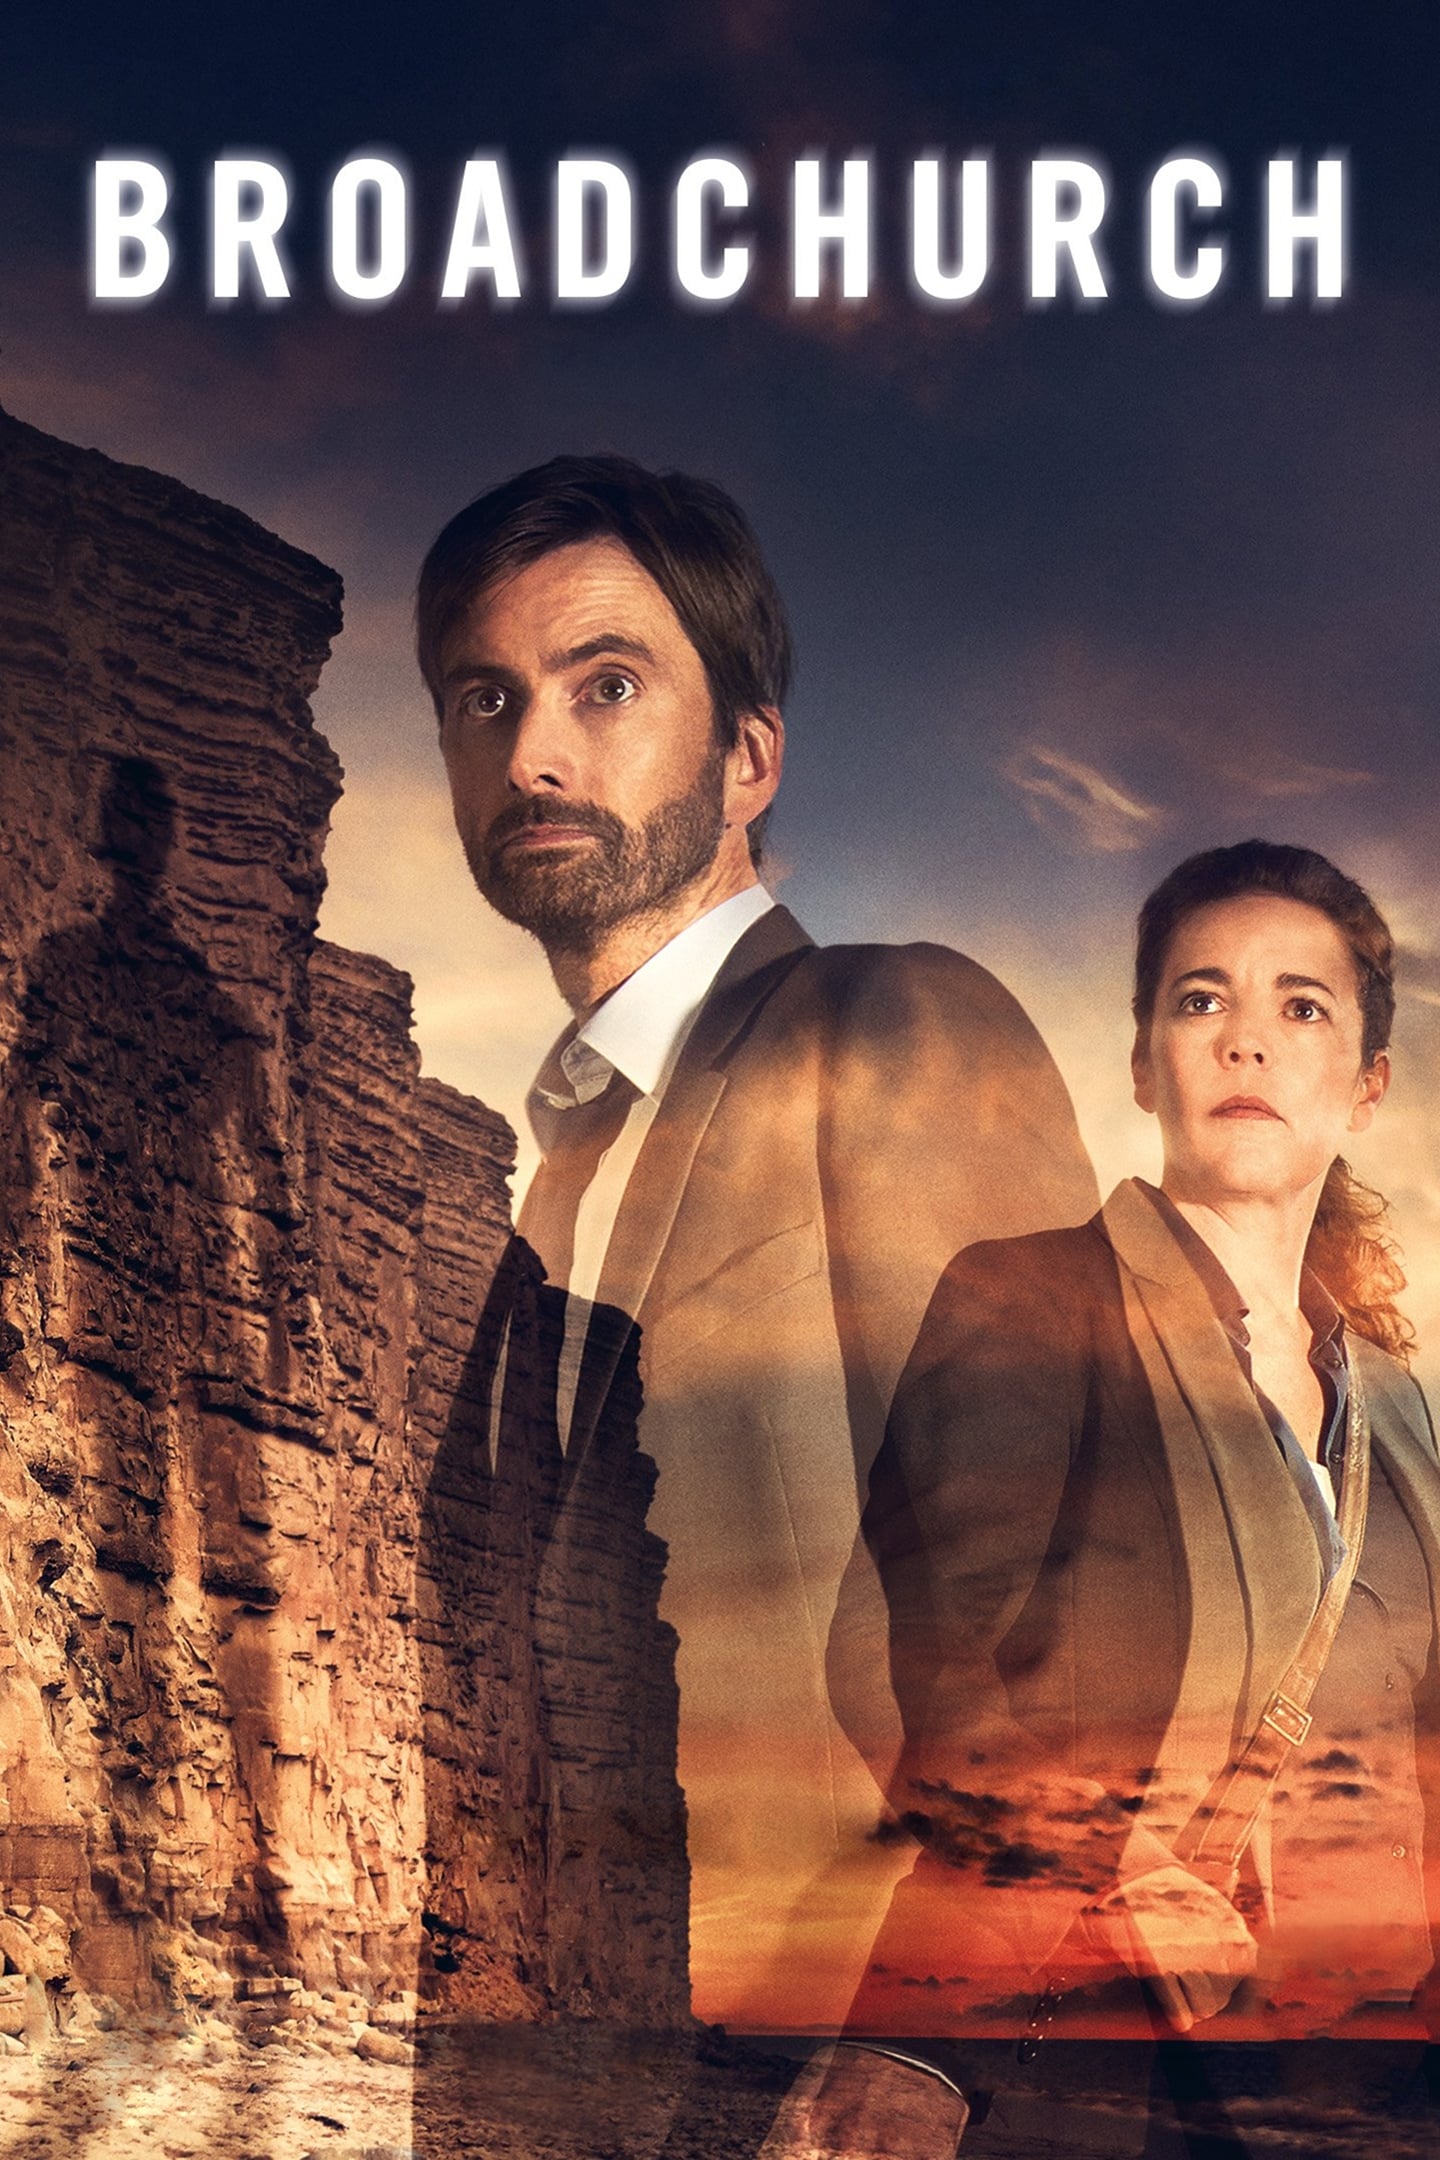 Broadchurch TV Shows About Seaside Town